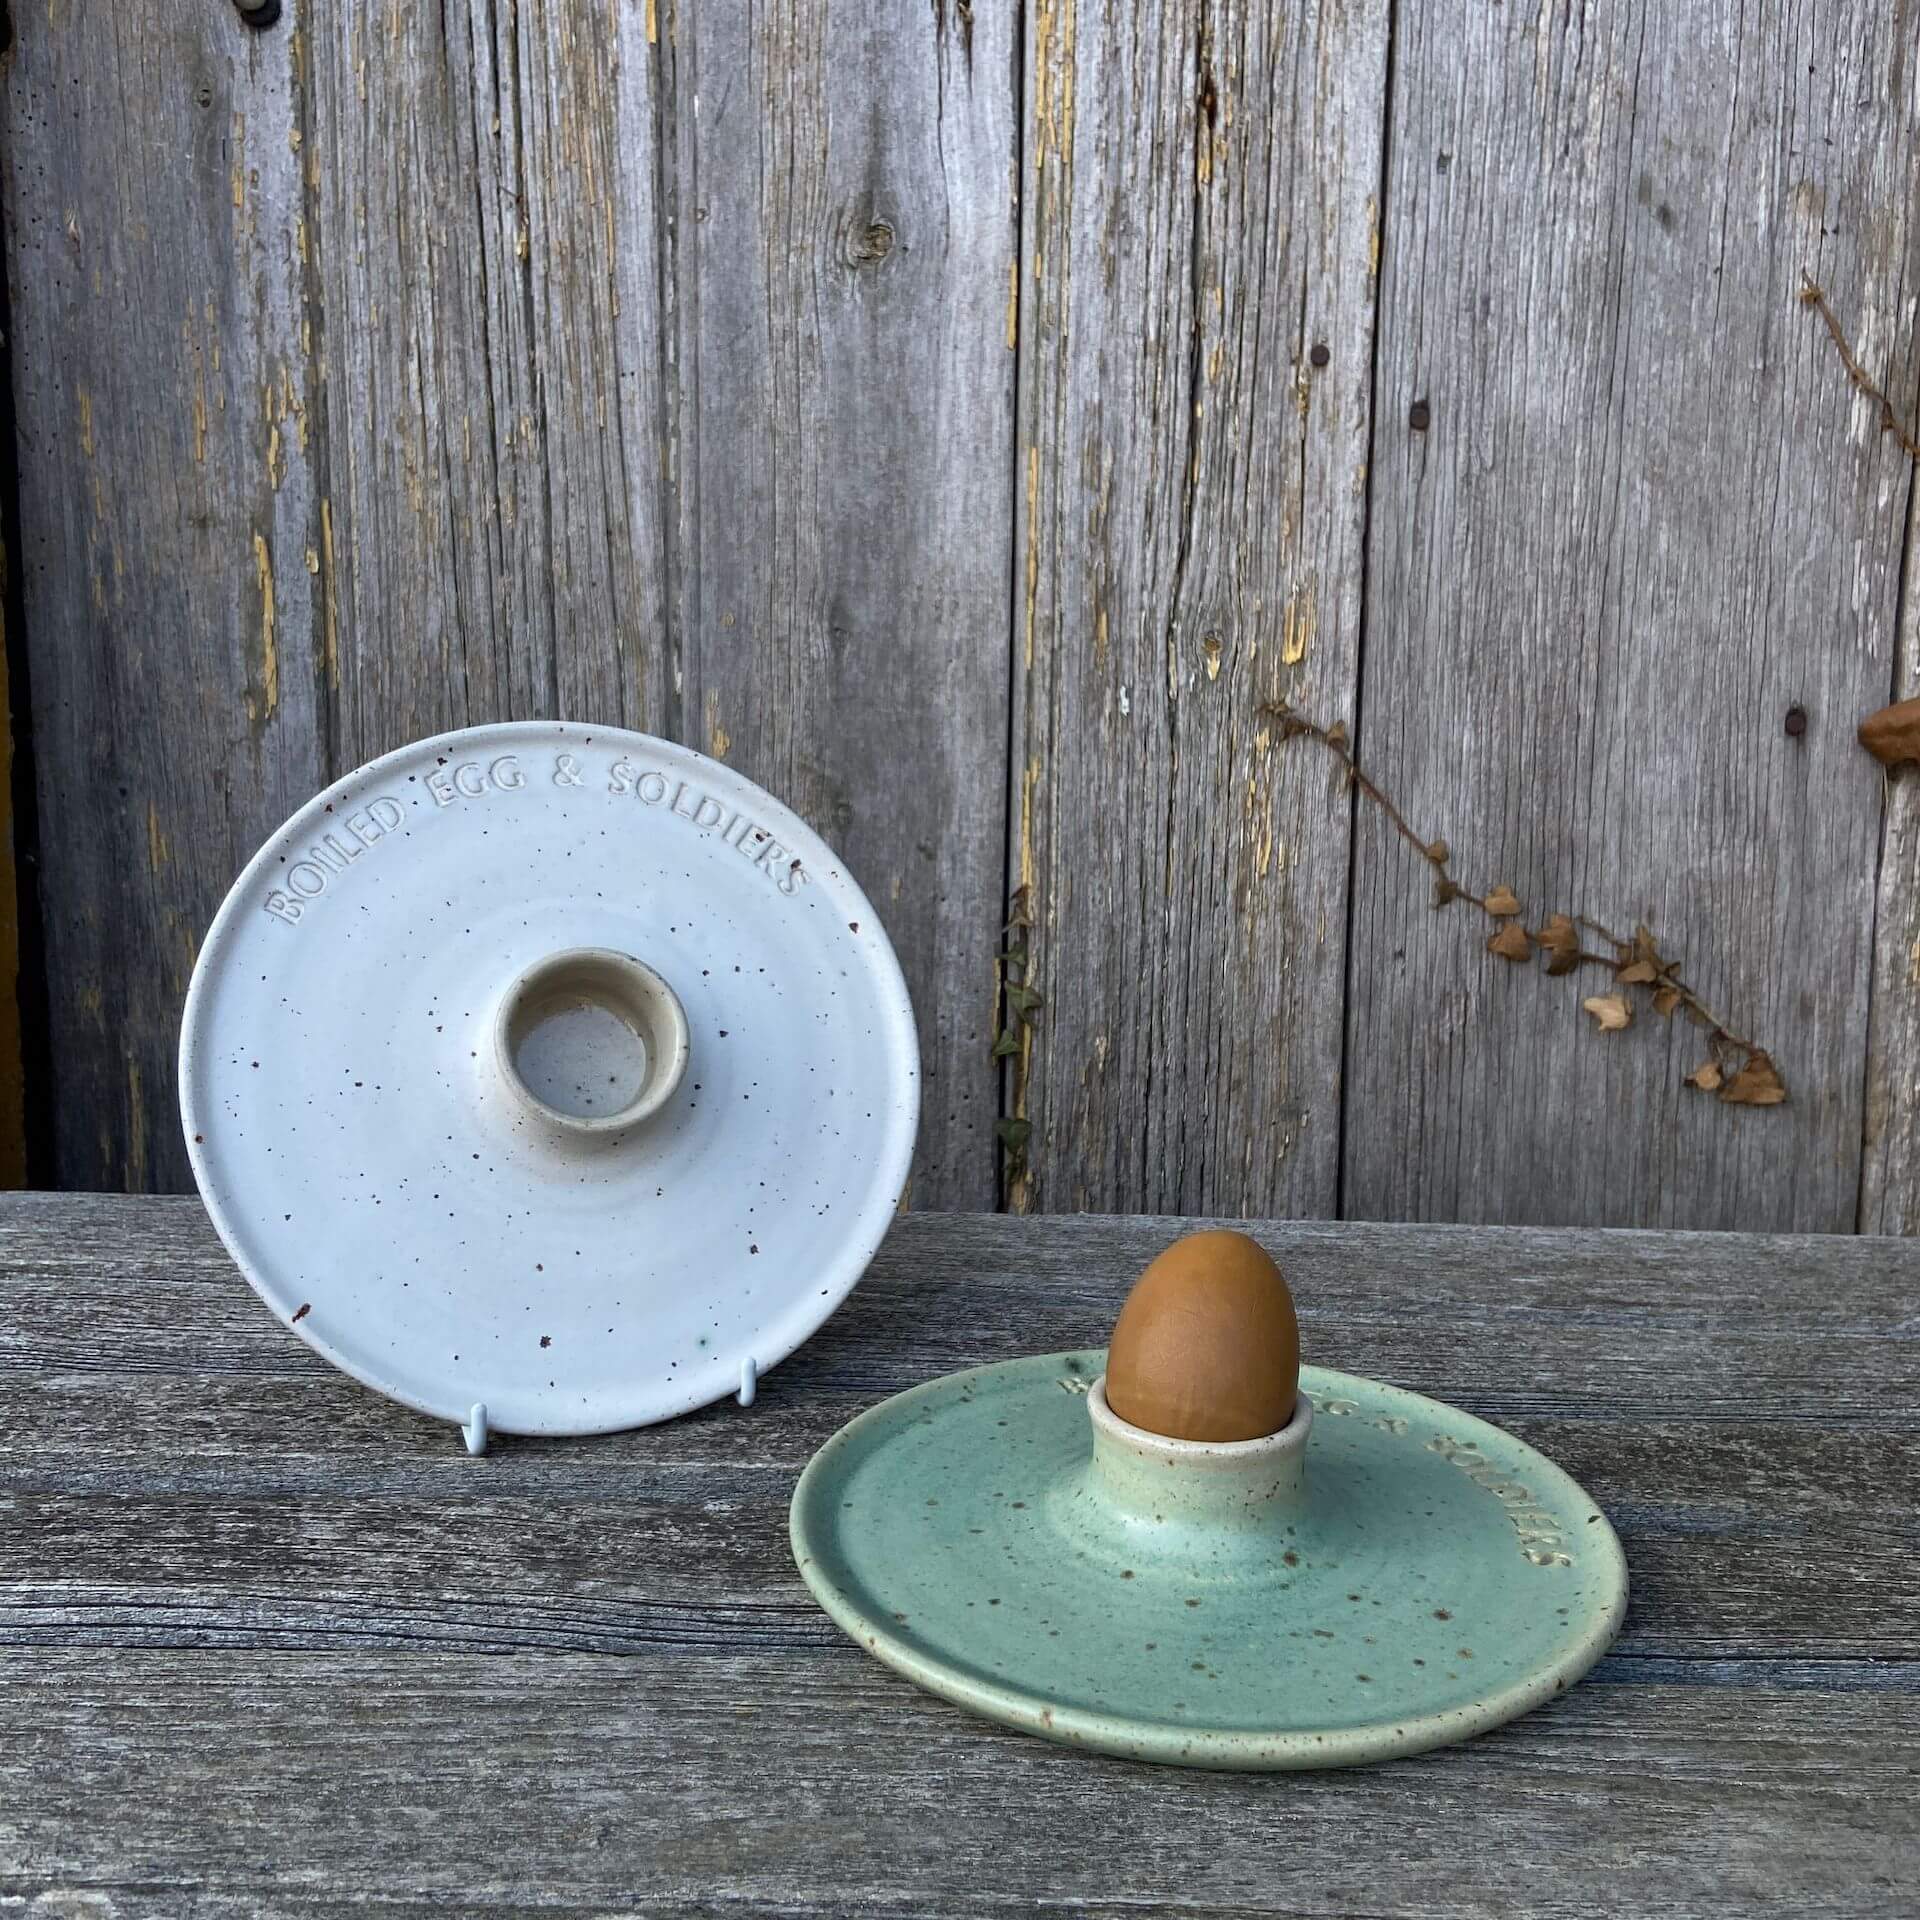 The Village Pottery Boiled Egg & Soldier Plate (various colours)